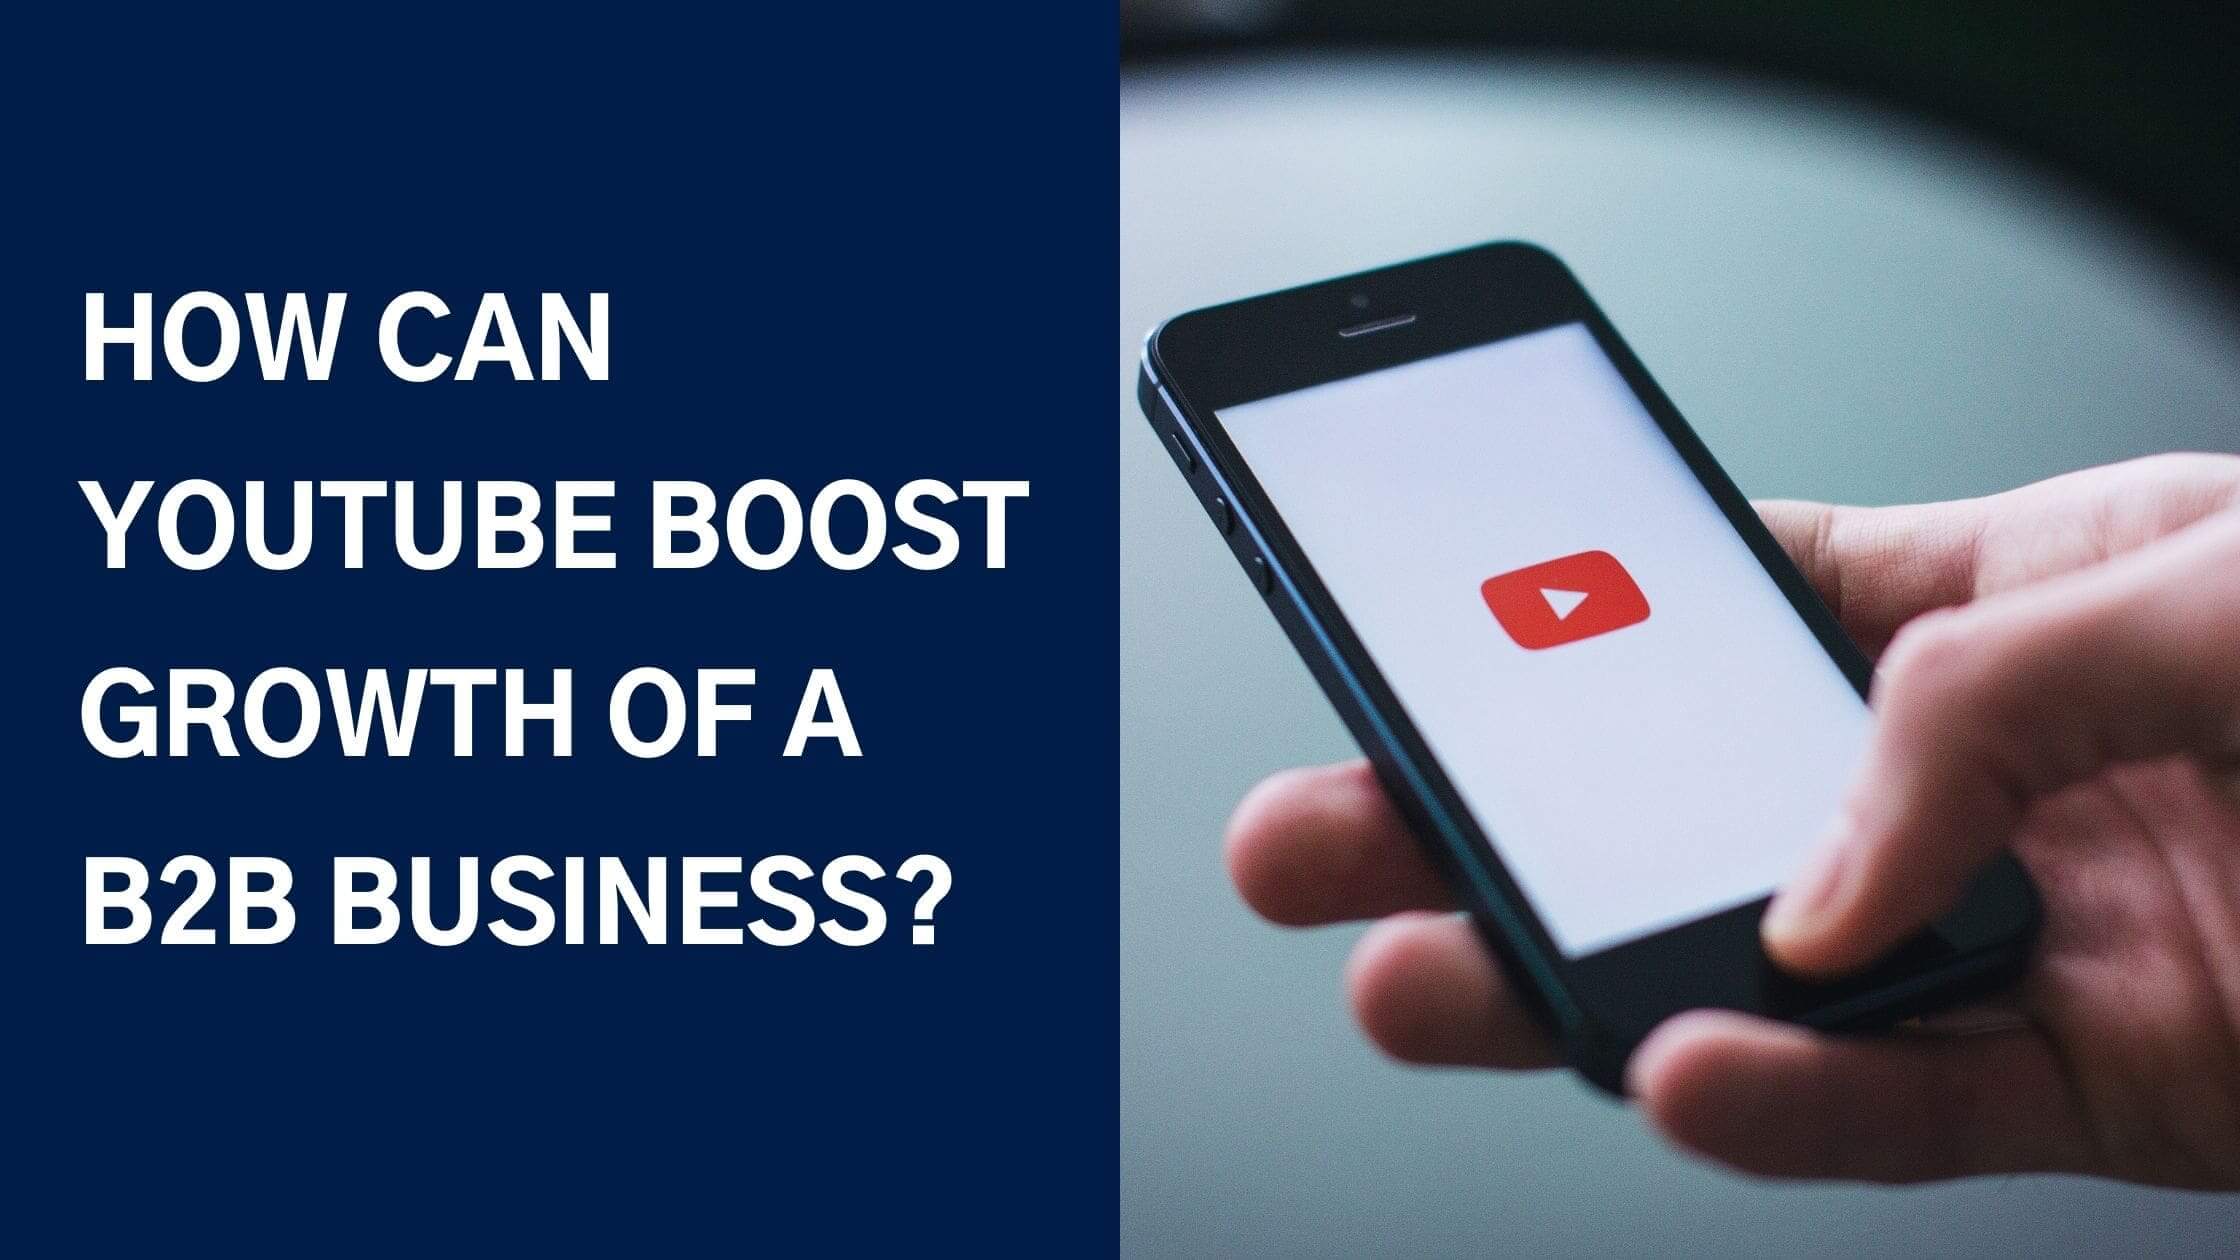 How Can YouTube Boost Growth Of A B2B Business